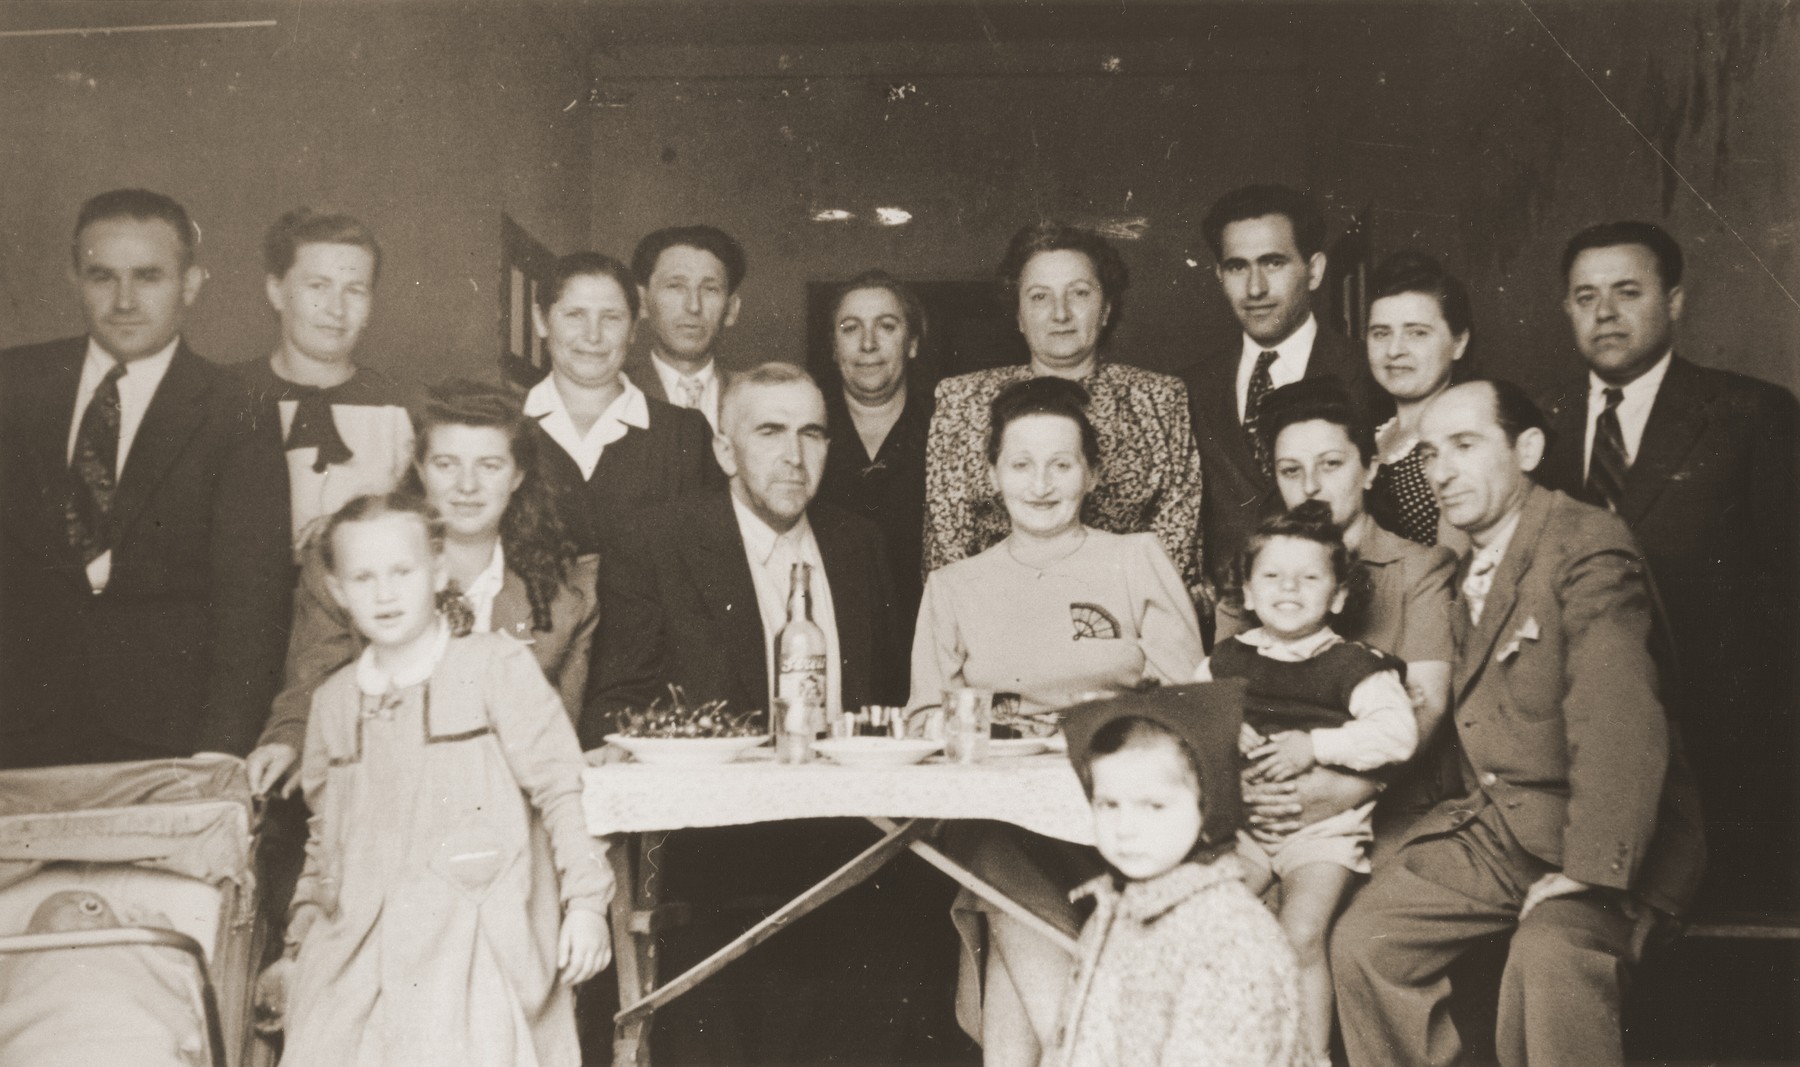 Group portrait of Jewish DPs at a going away party in the Trani displaced persons camp.

Among those pictured are Motel, Zelda and Masha Leikach, Chaim and Chaika Katz, and Aaron Pelc.